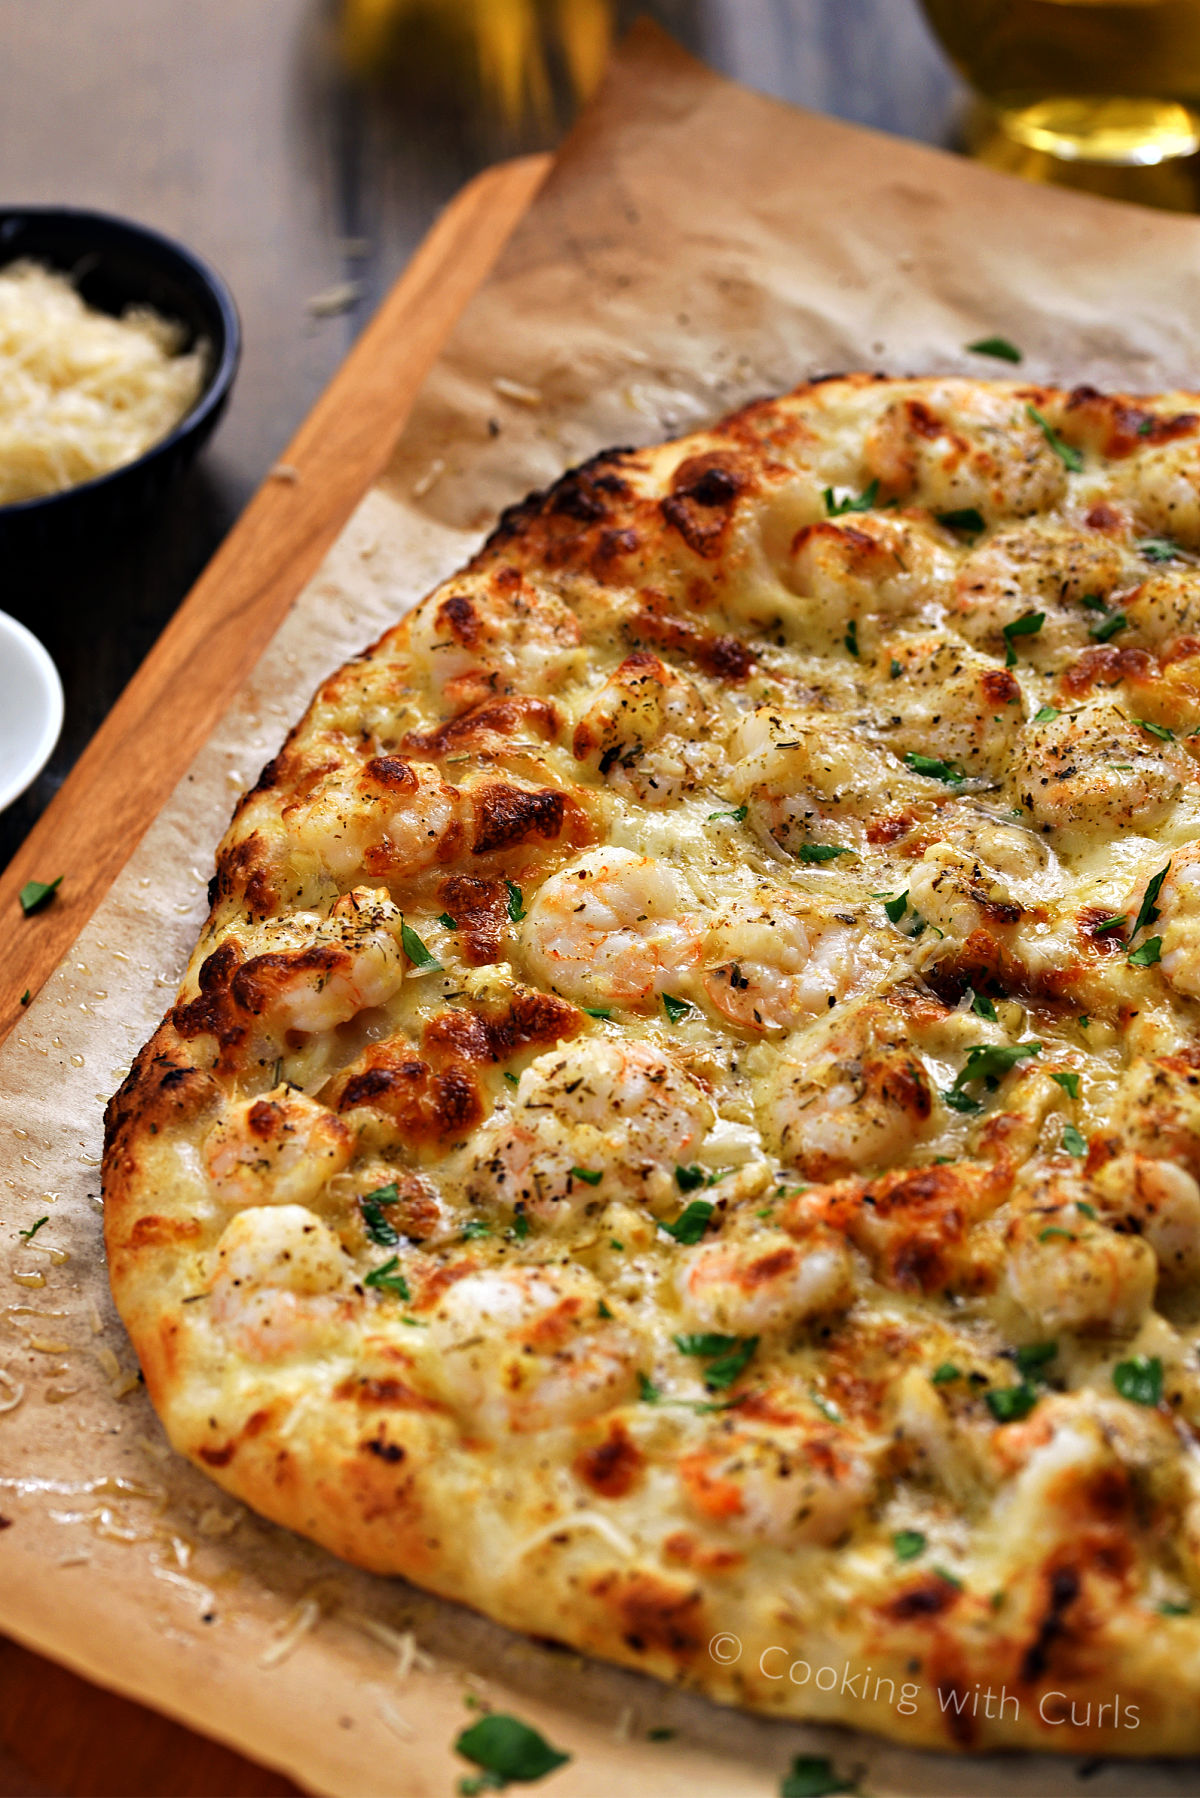 A whole shrimp scampi pizza on a wooden pizza peel with wine glasses in the background.